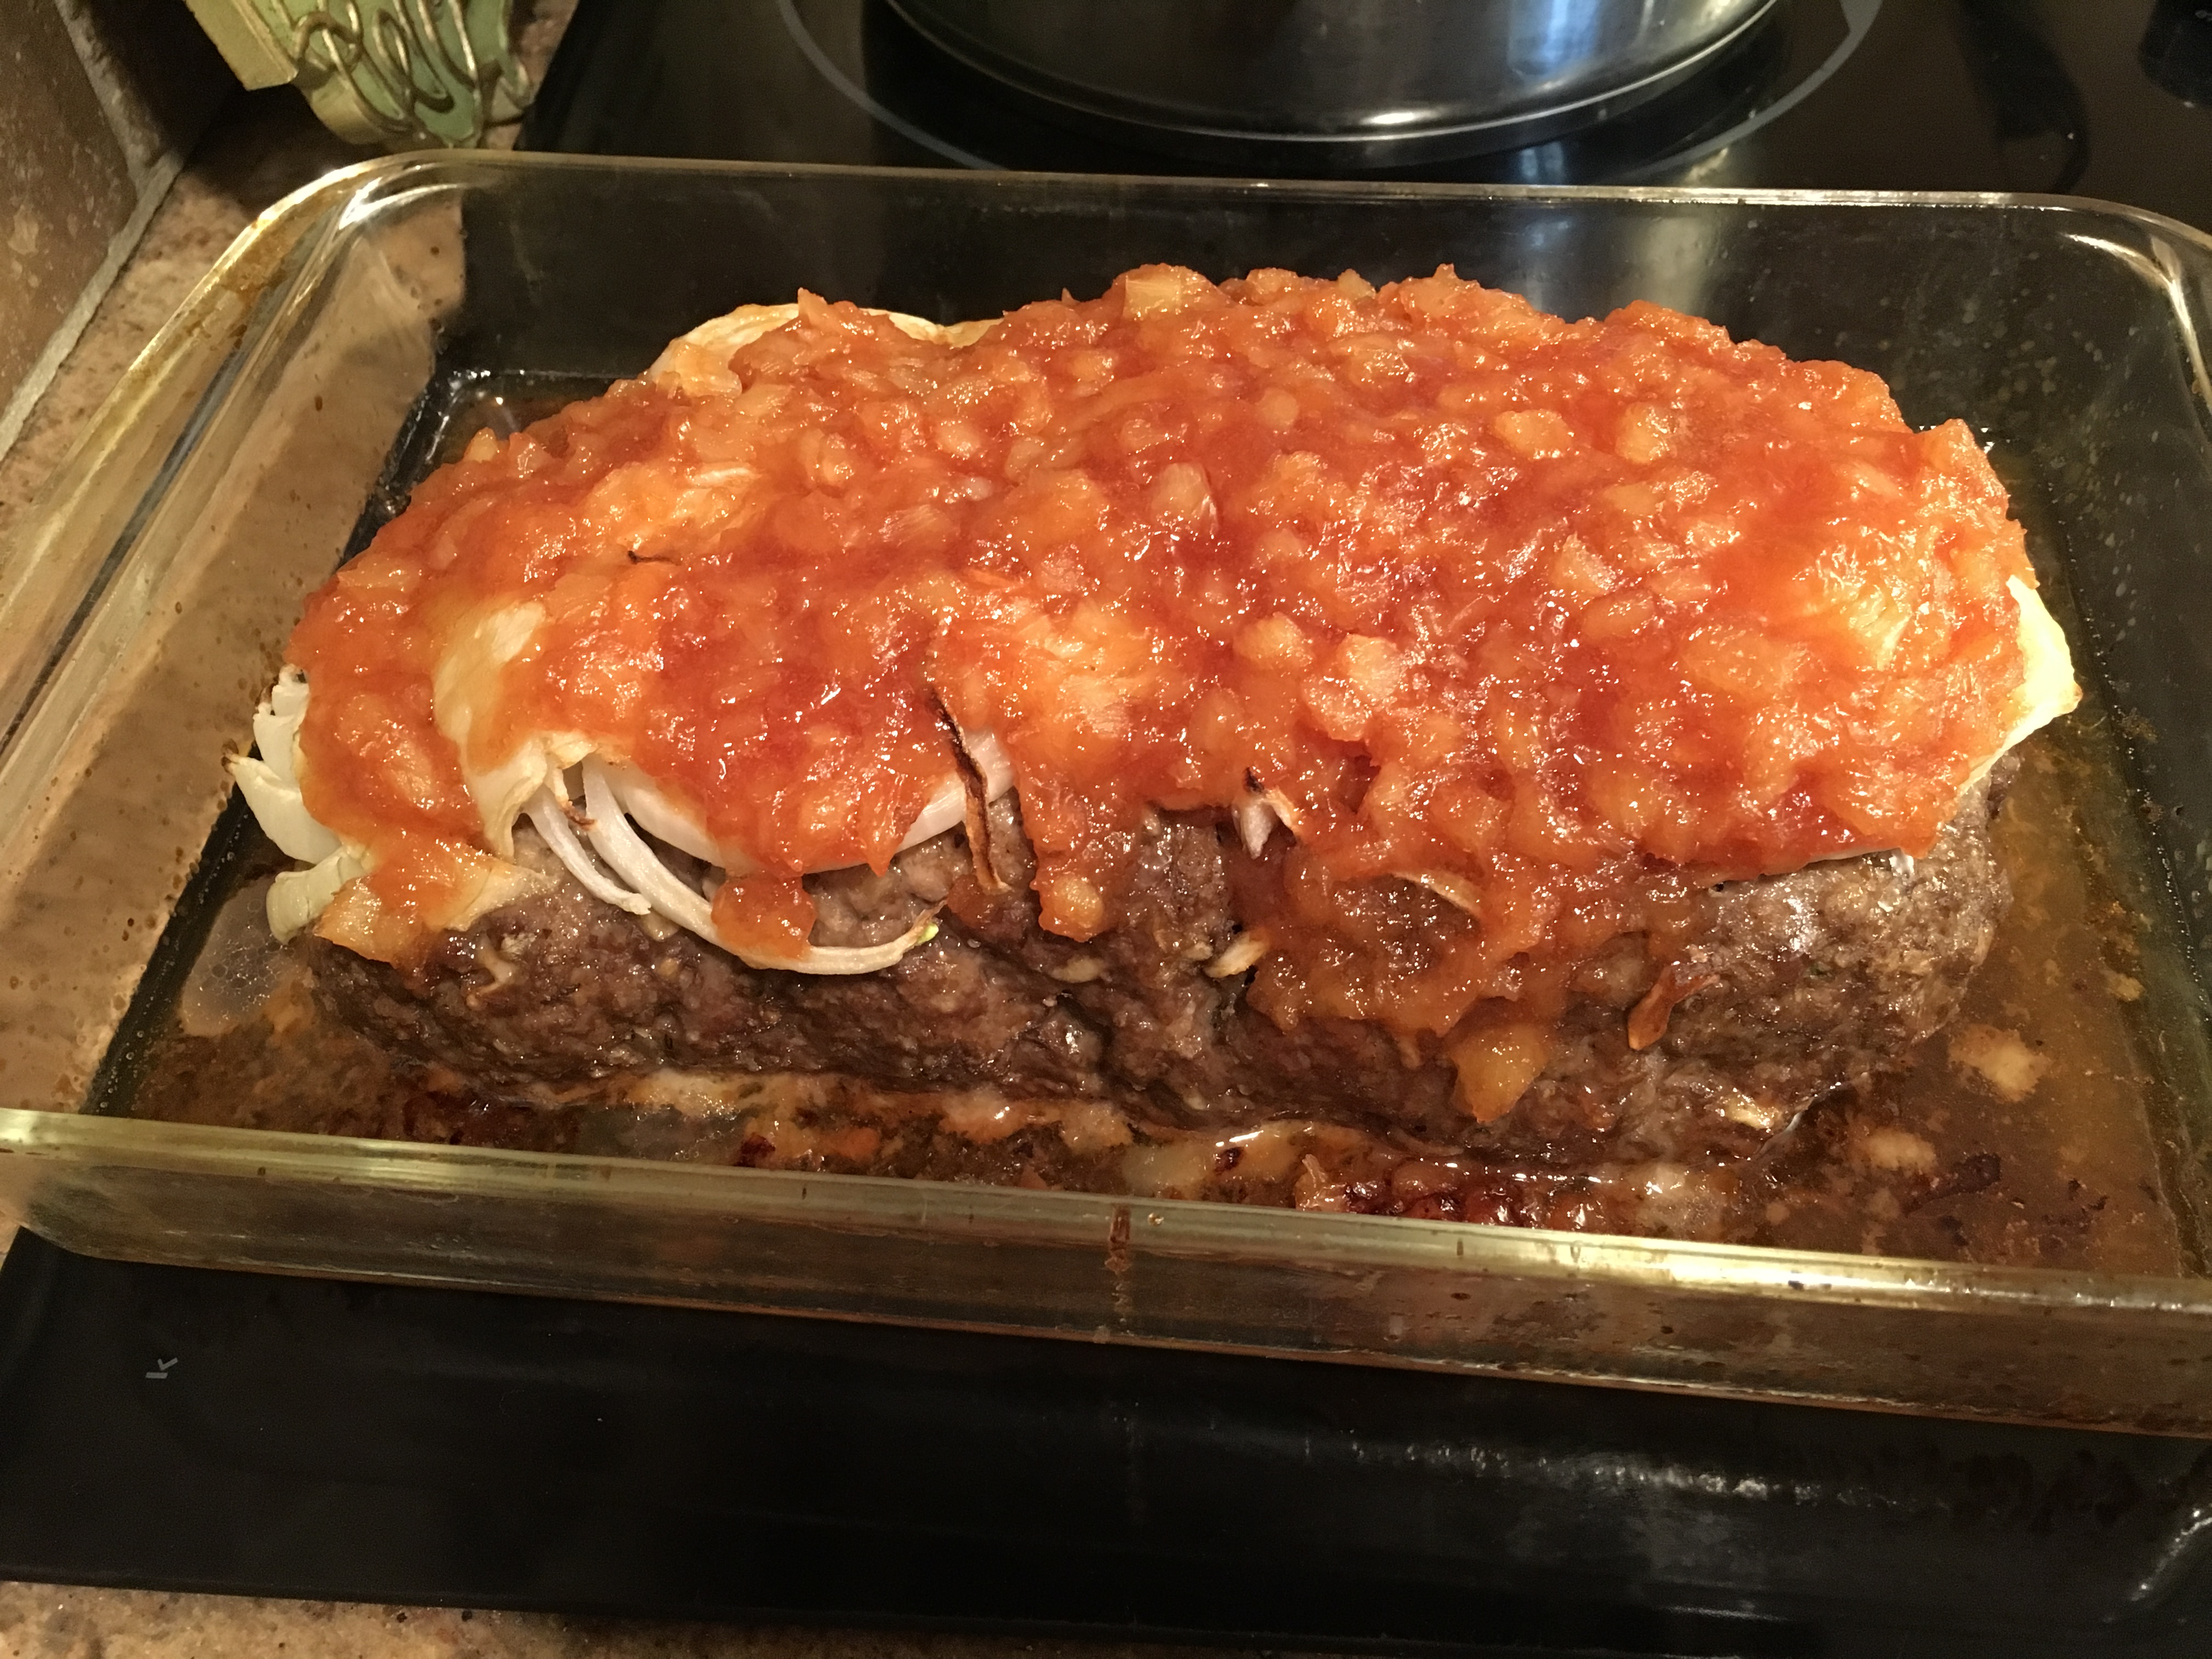 Best Meatloaf in the Whole Wide World!